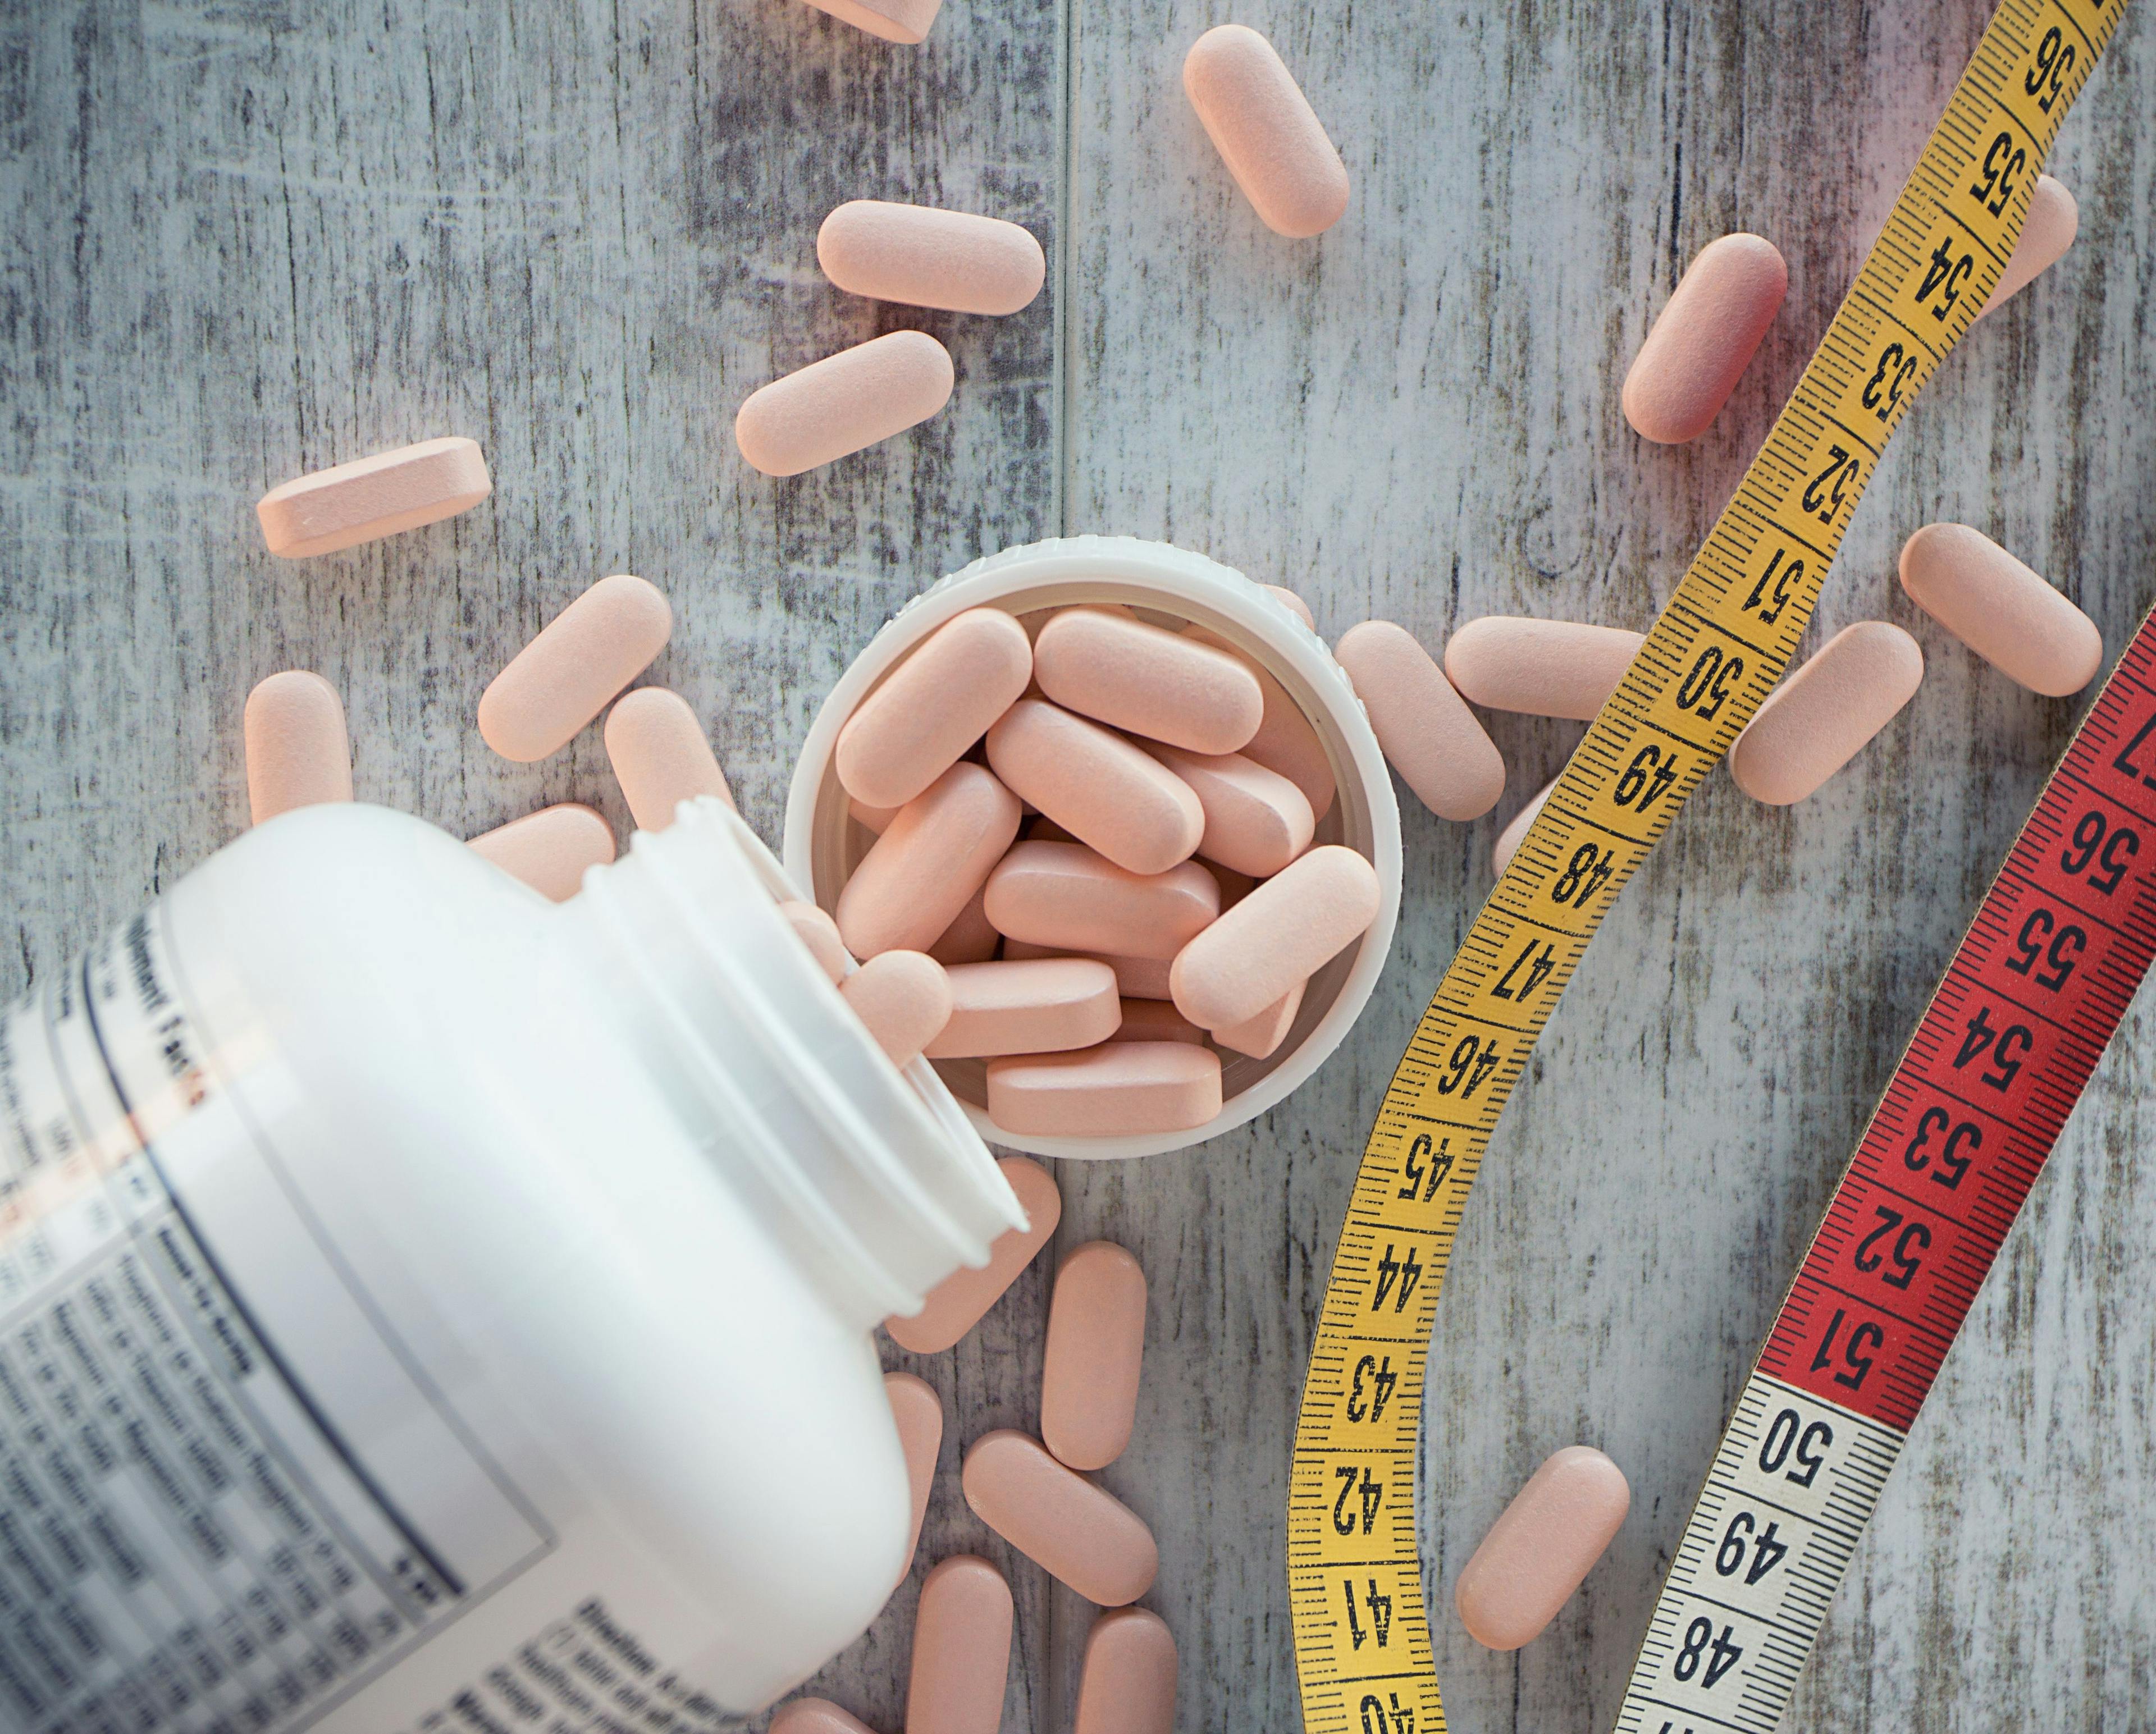 Diabetes Weight Loss Drugs Could be Linked to Reduced Risk of MS, Study Finds